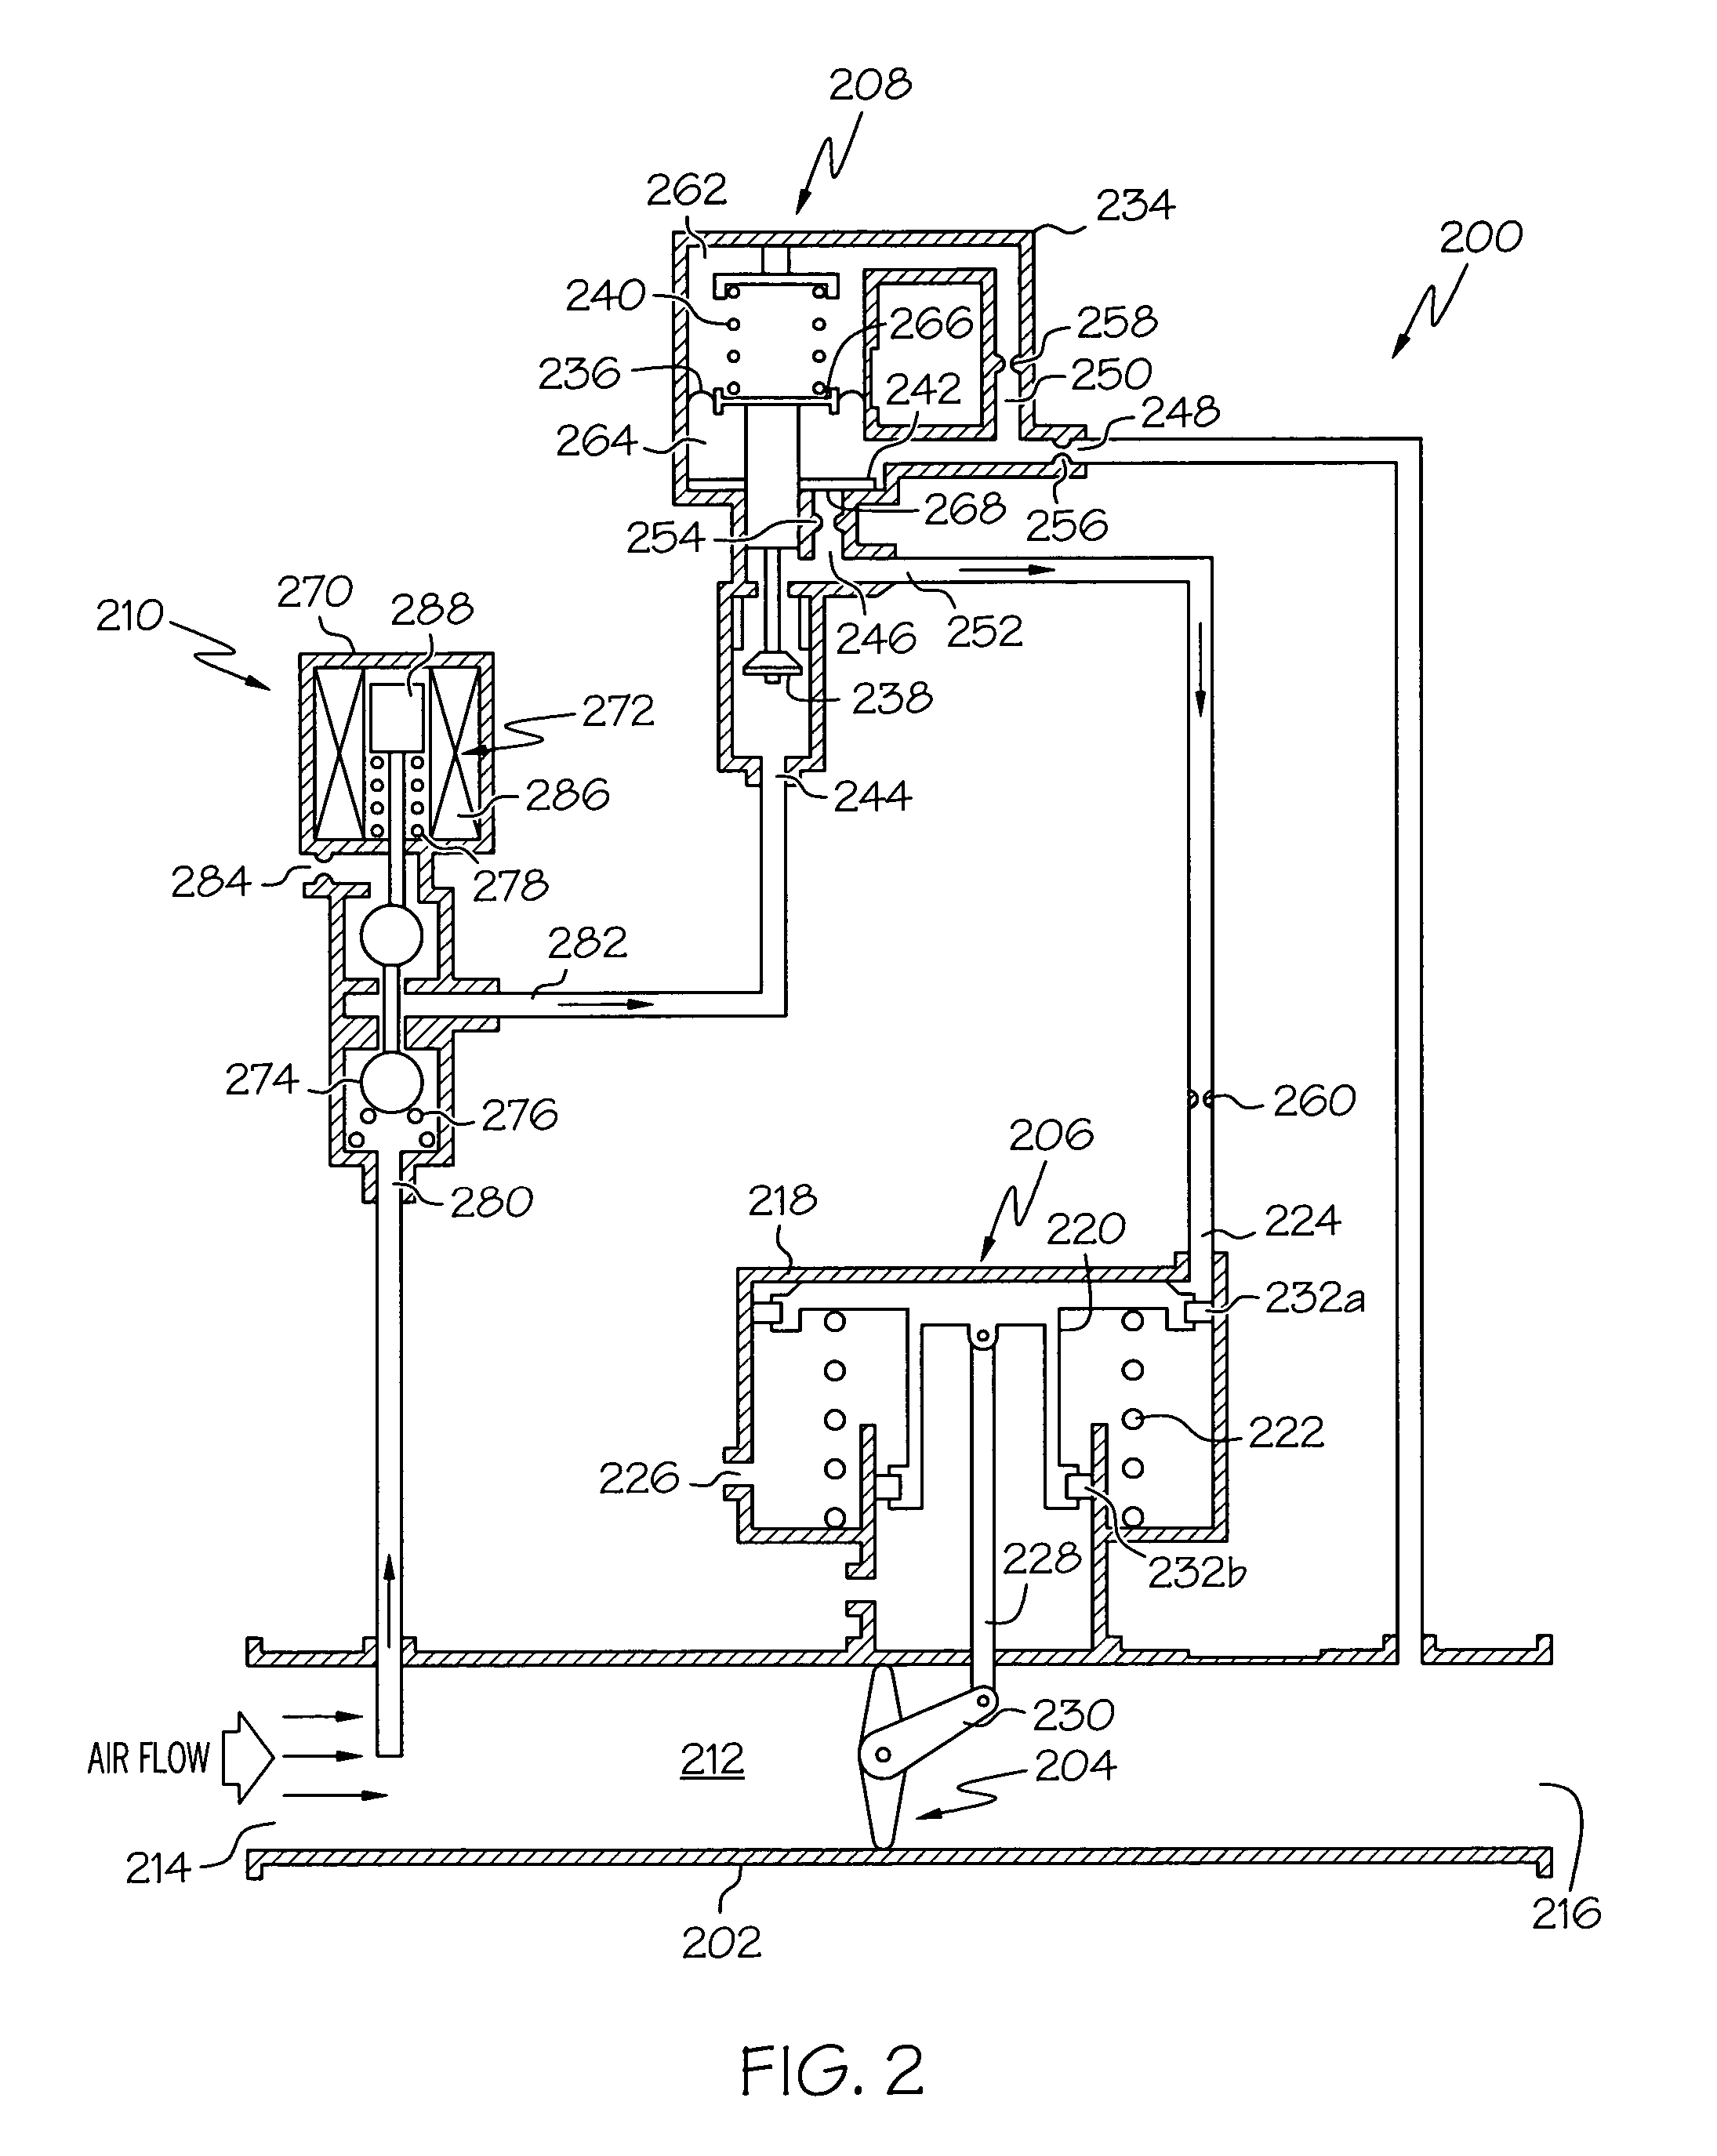 Pneumatic valve control having improved opening characteristics and an air turbine starter incorporating the same